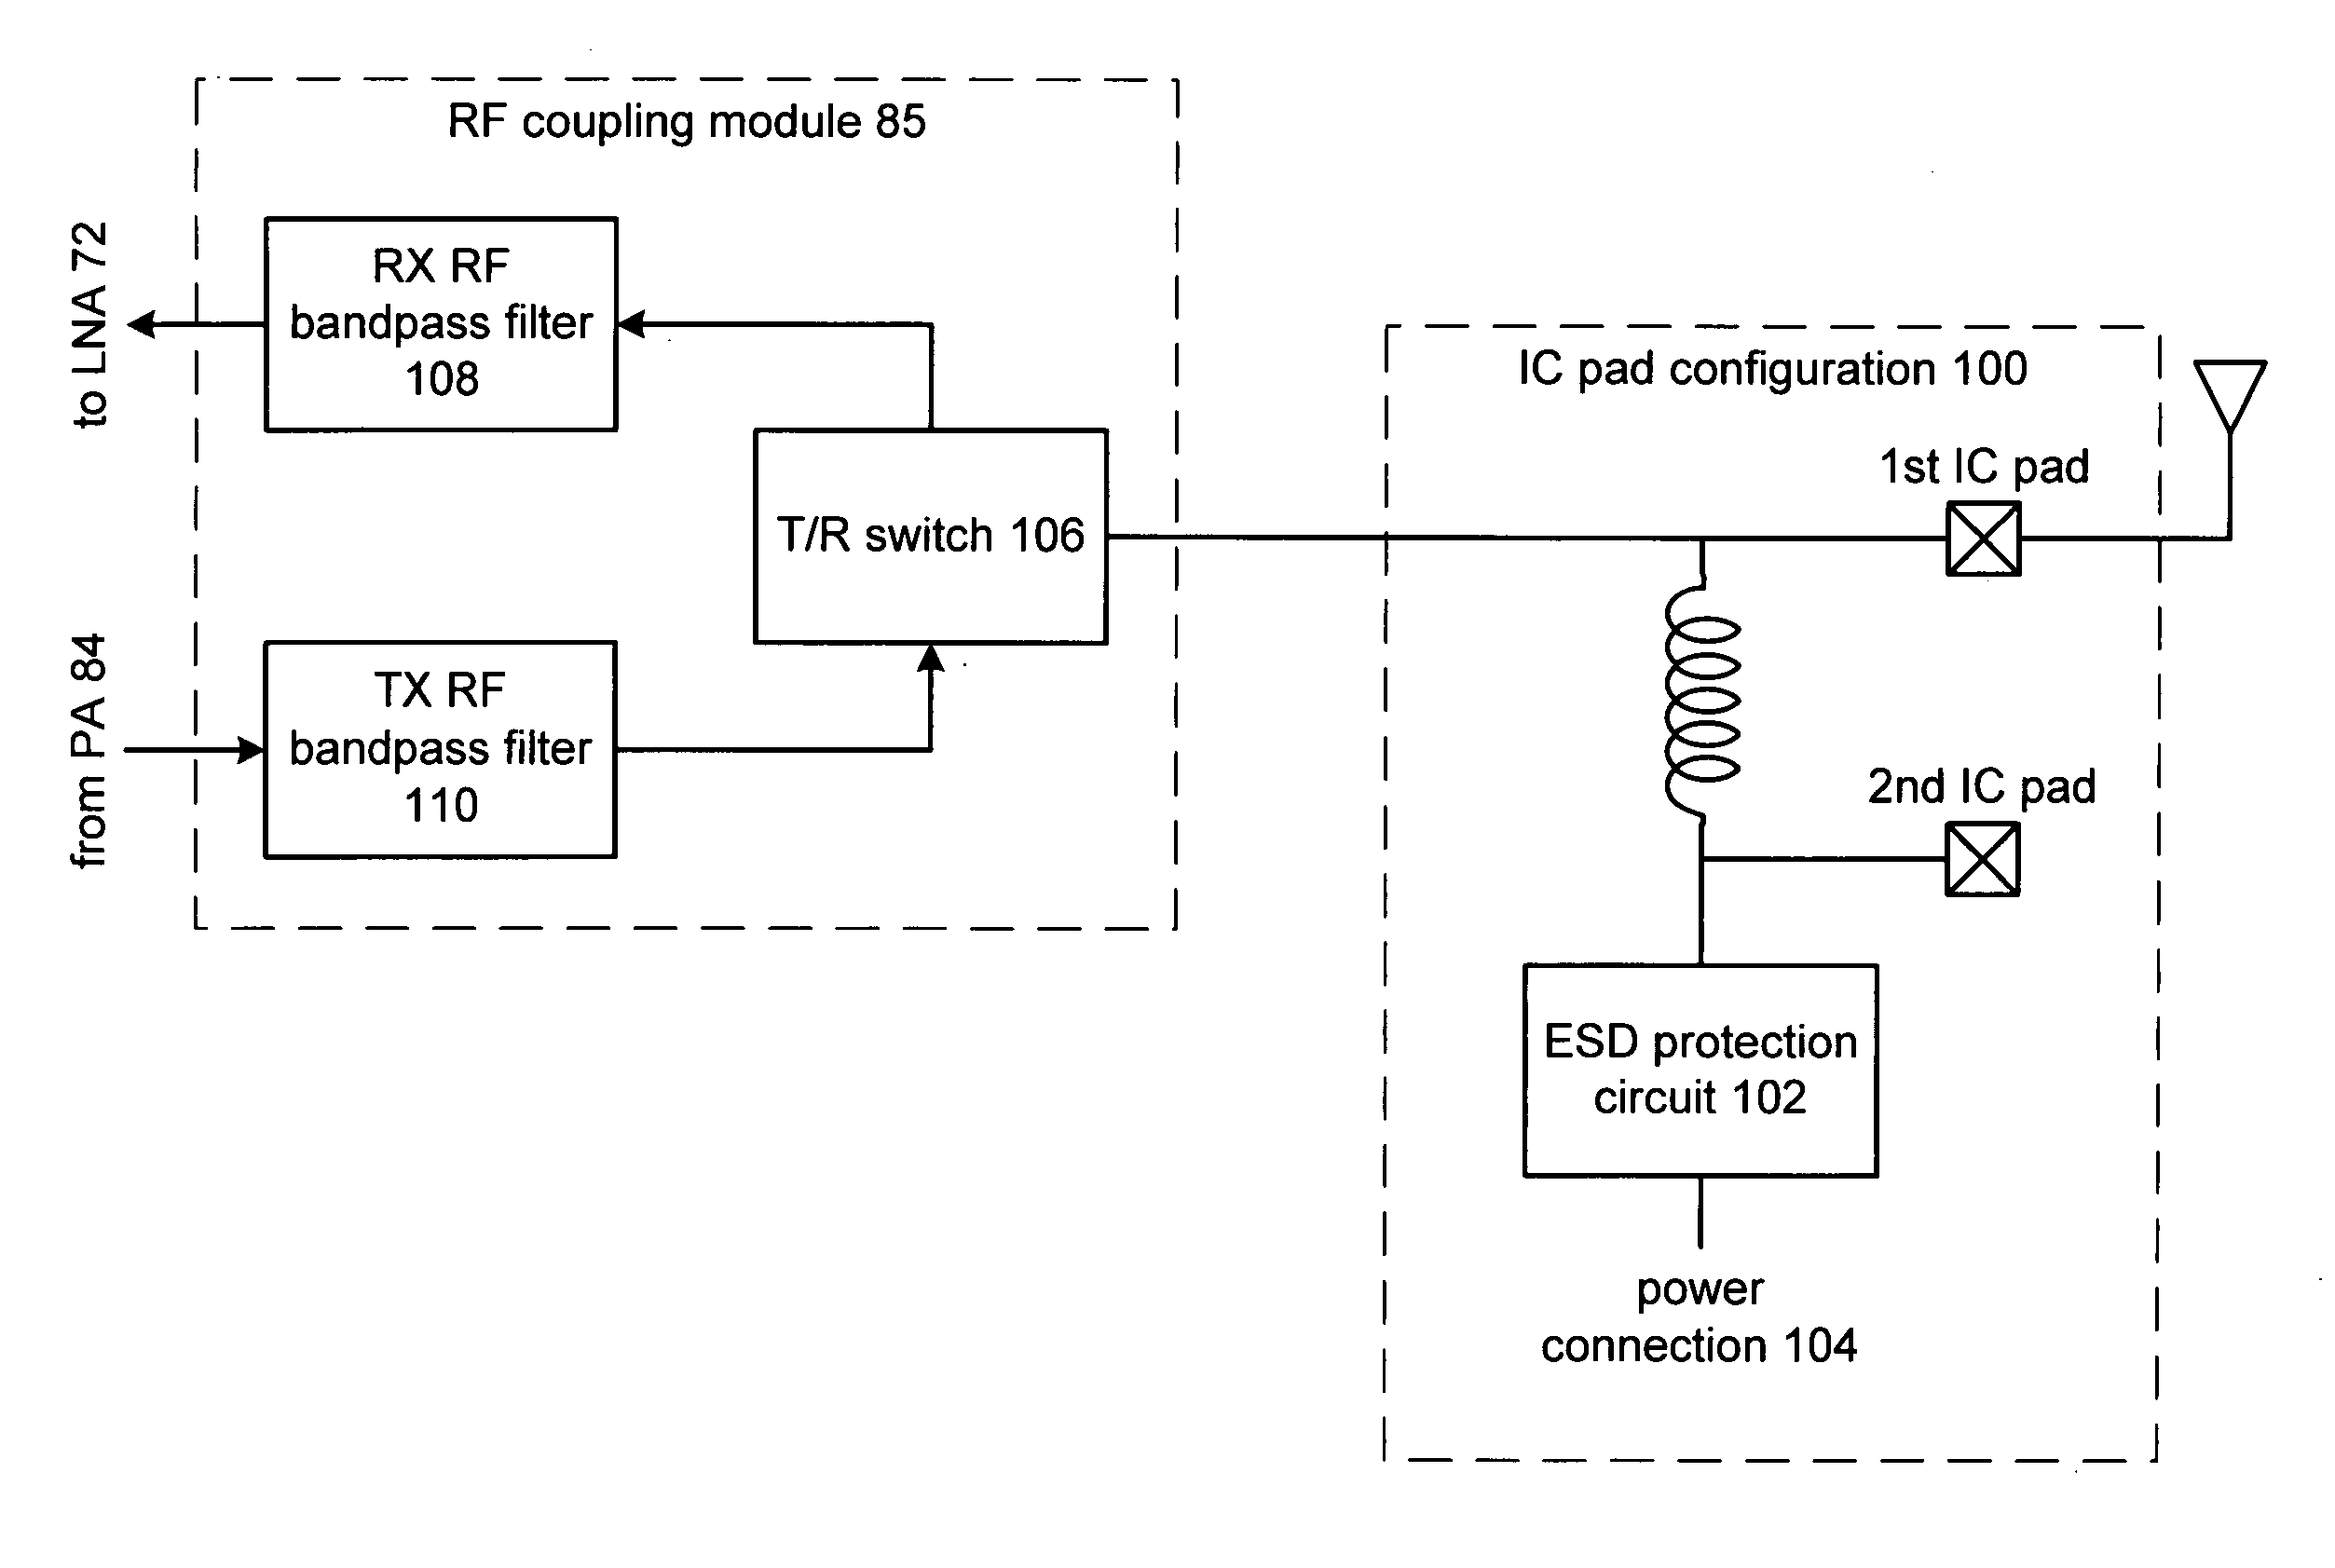 High frequency integrated circuit pad configuration including ESD protection circuitry